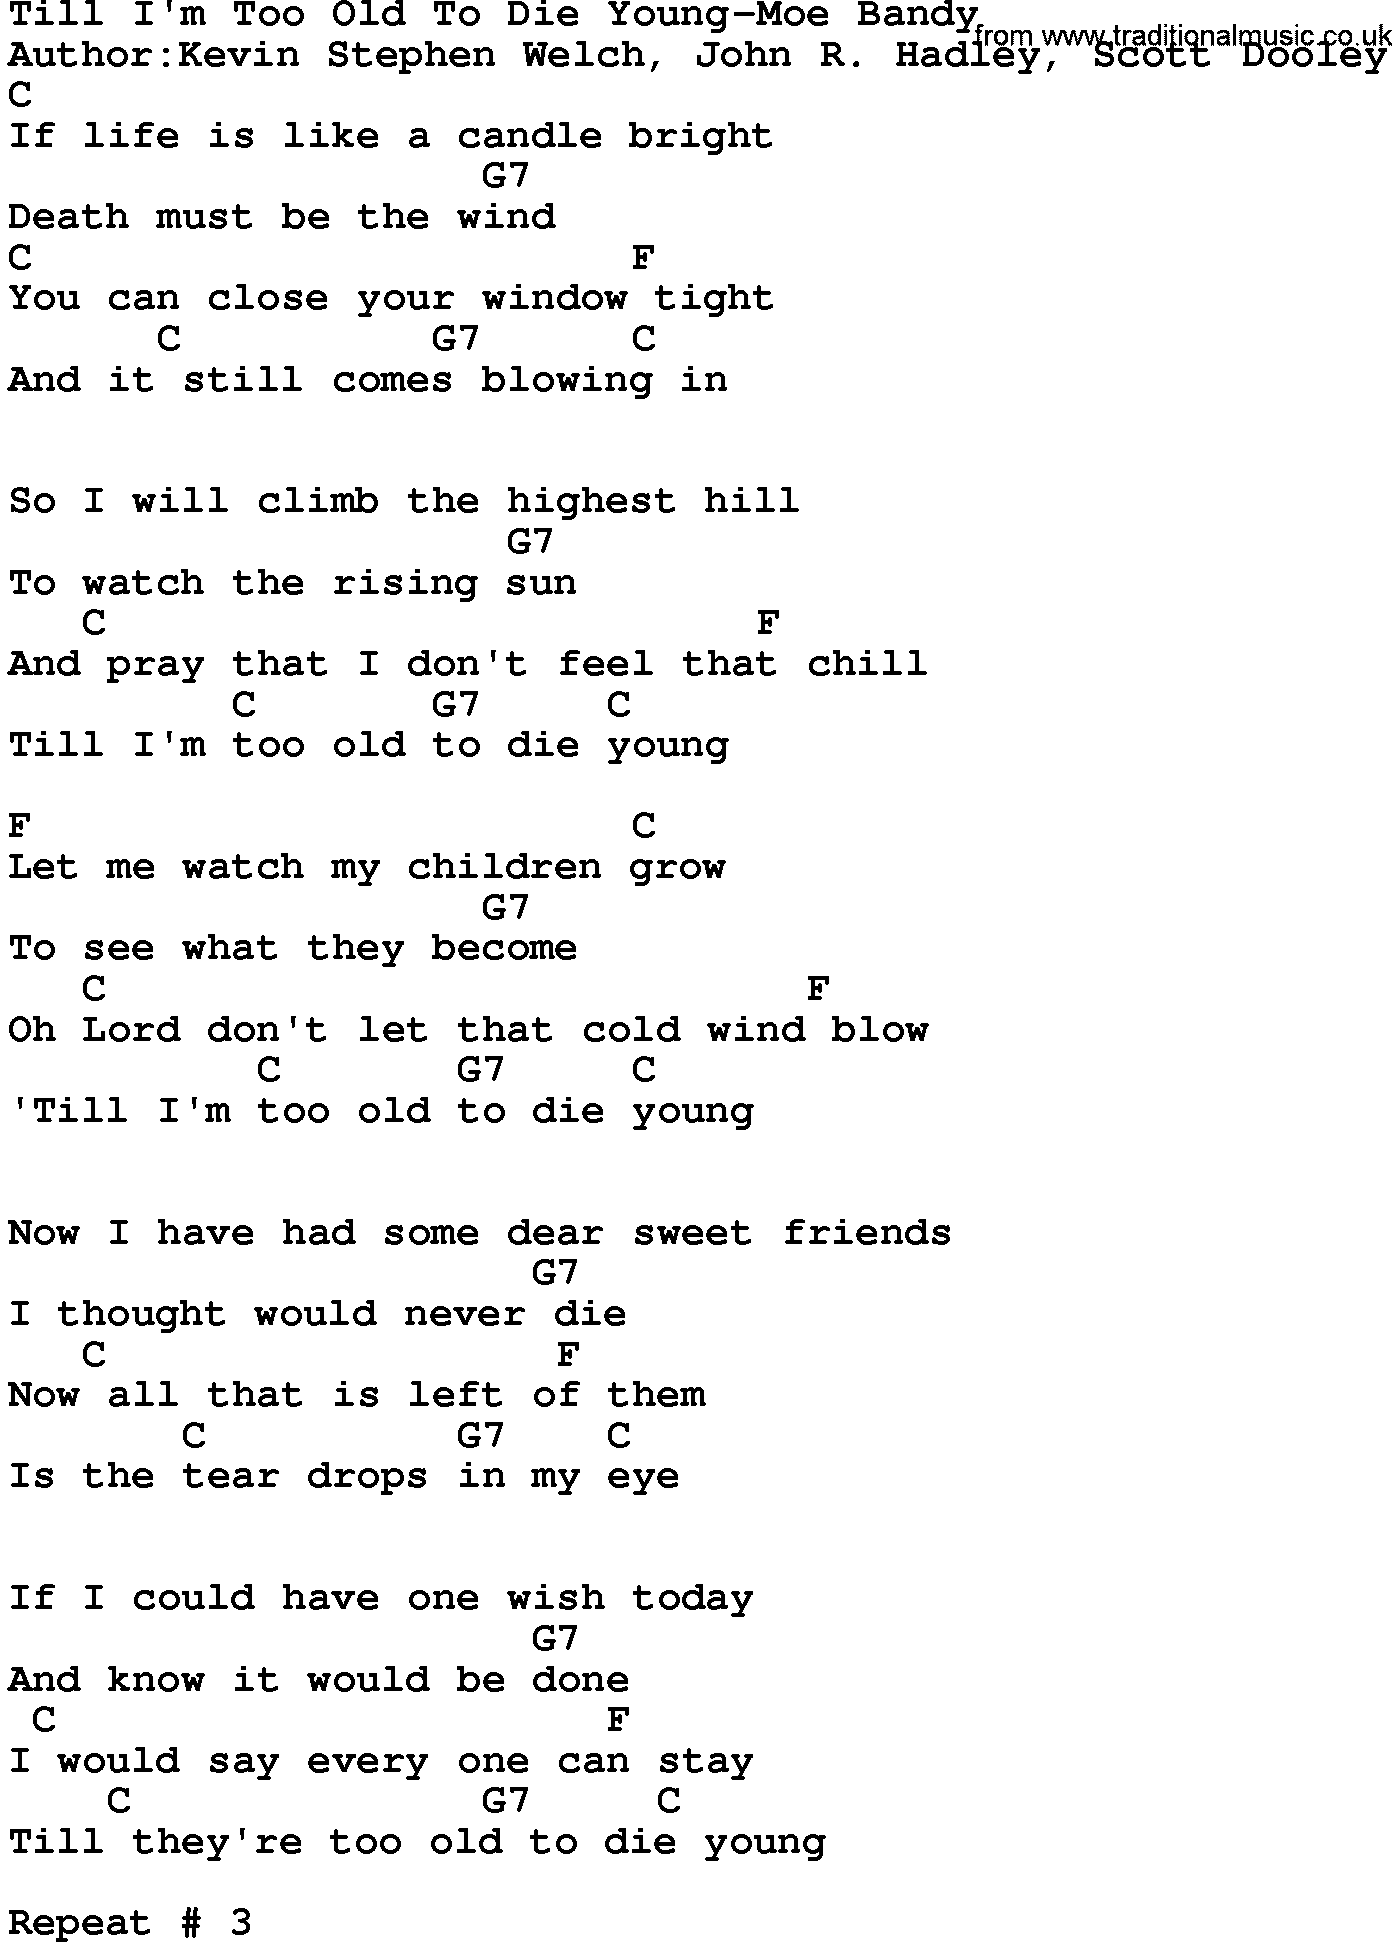 Country music song: Till I'm Too Old To Die Young-Moe Bandy lyrics and chords